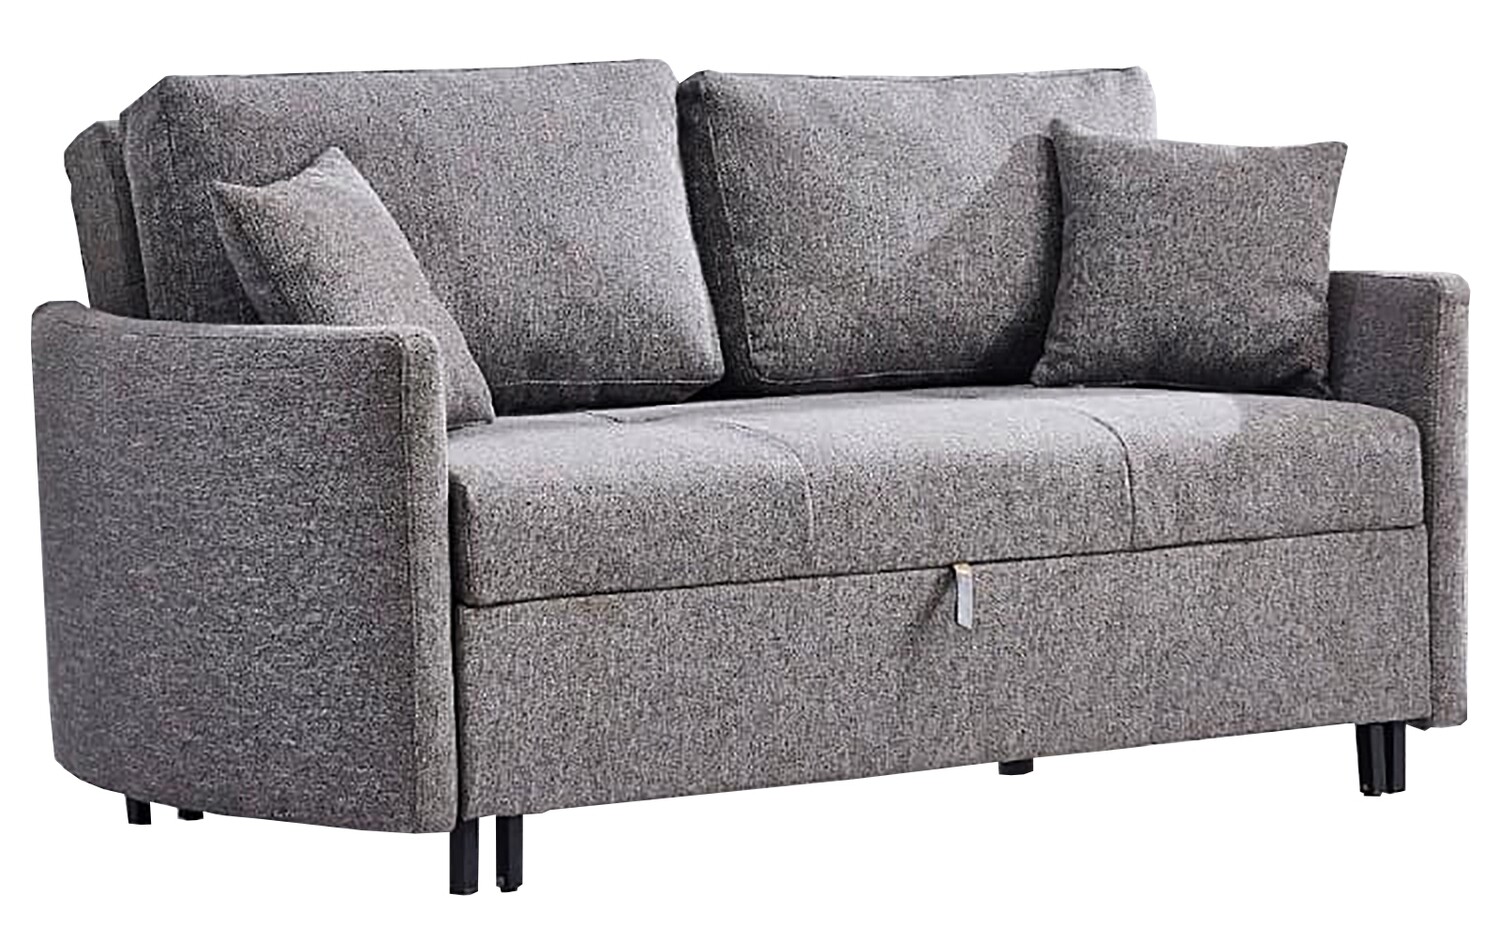 Kirkby Sofa Bed - Charcoal